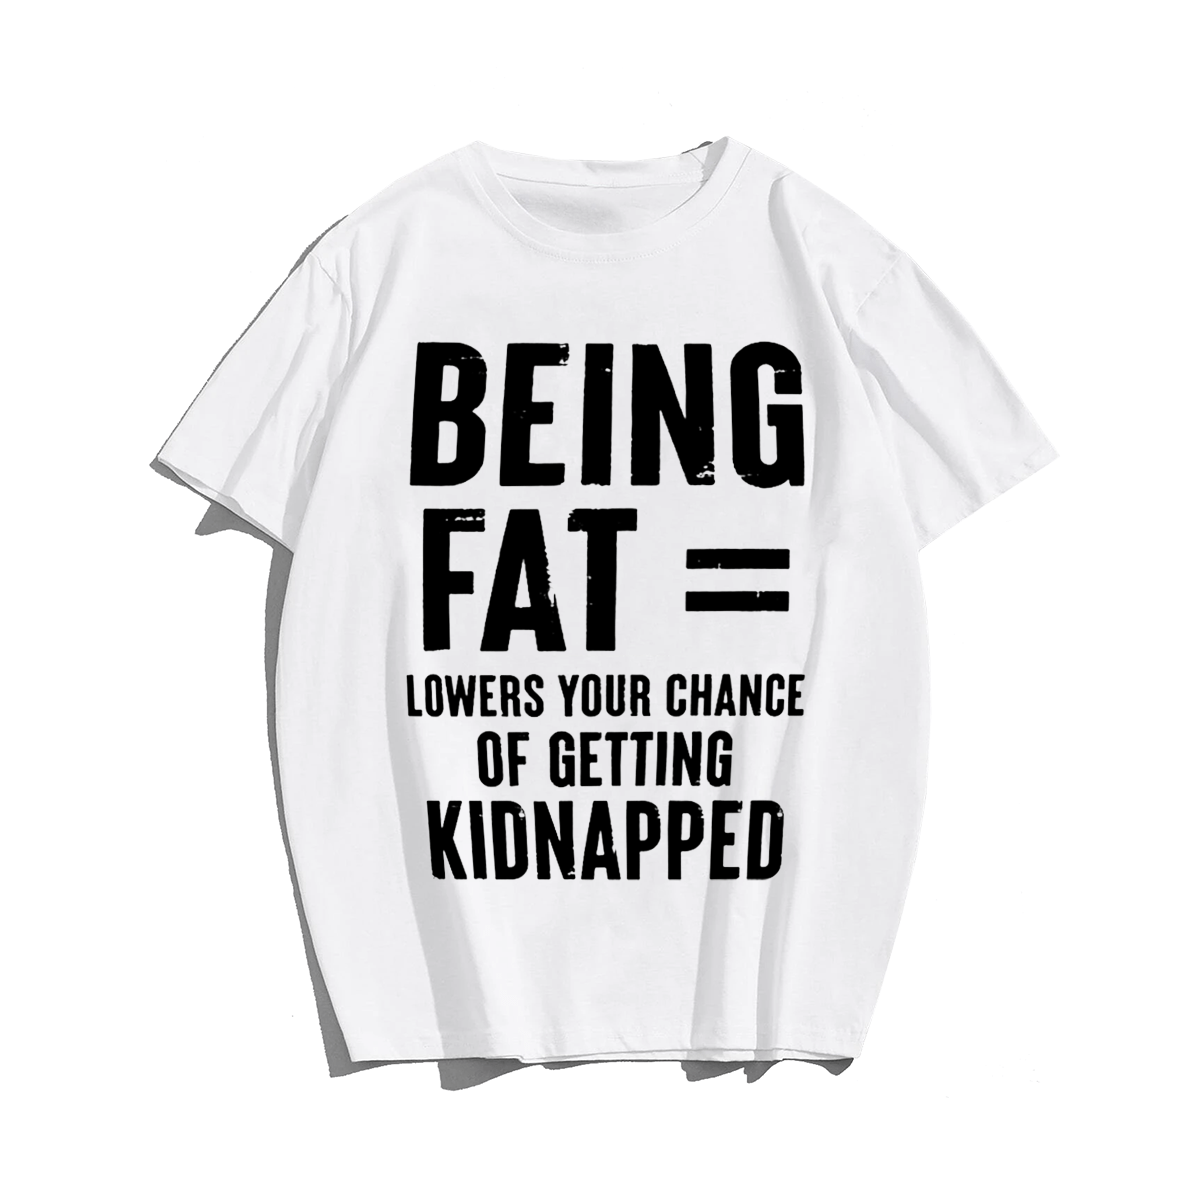 Being Fat T-shirt for Men, Oversize Plus Size Big & Tall Man Clothing